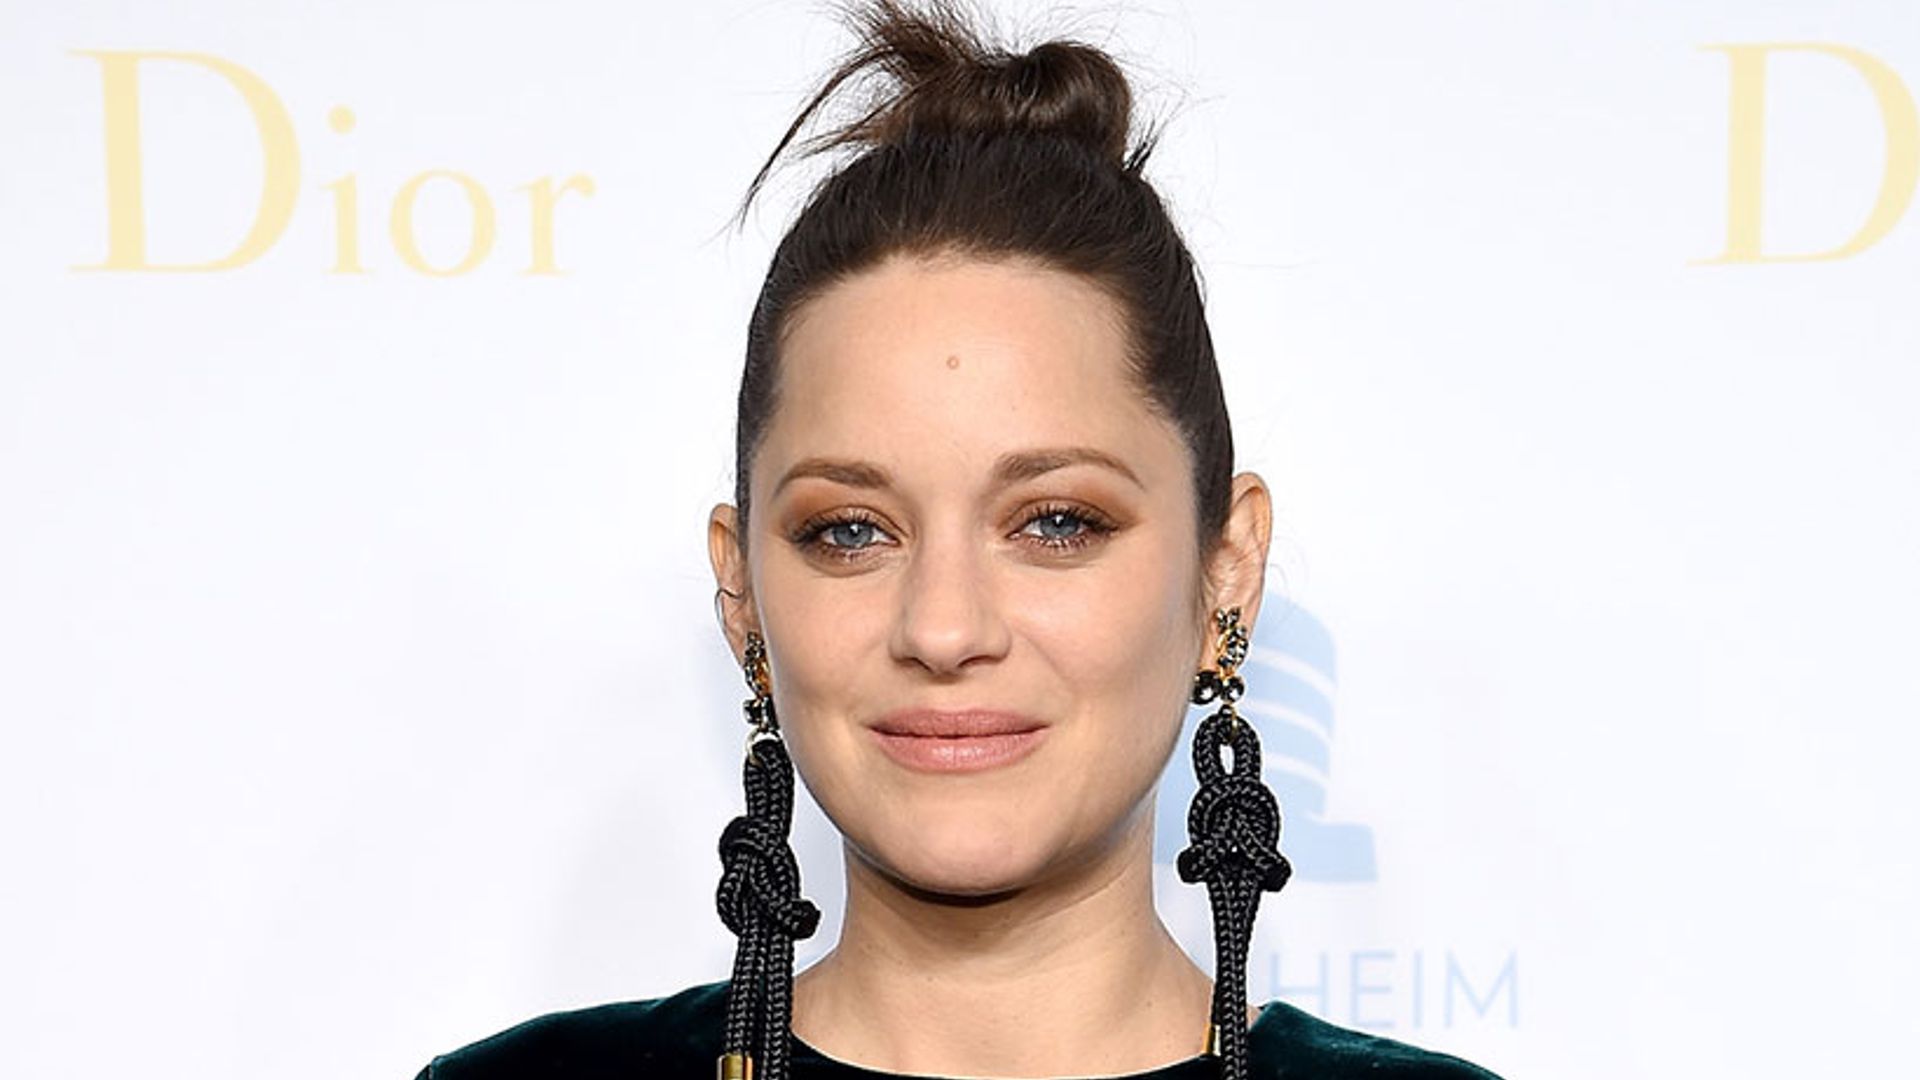 Marion Cotillard breaks the fashion rules in the best way at Cannes Film Festival